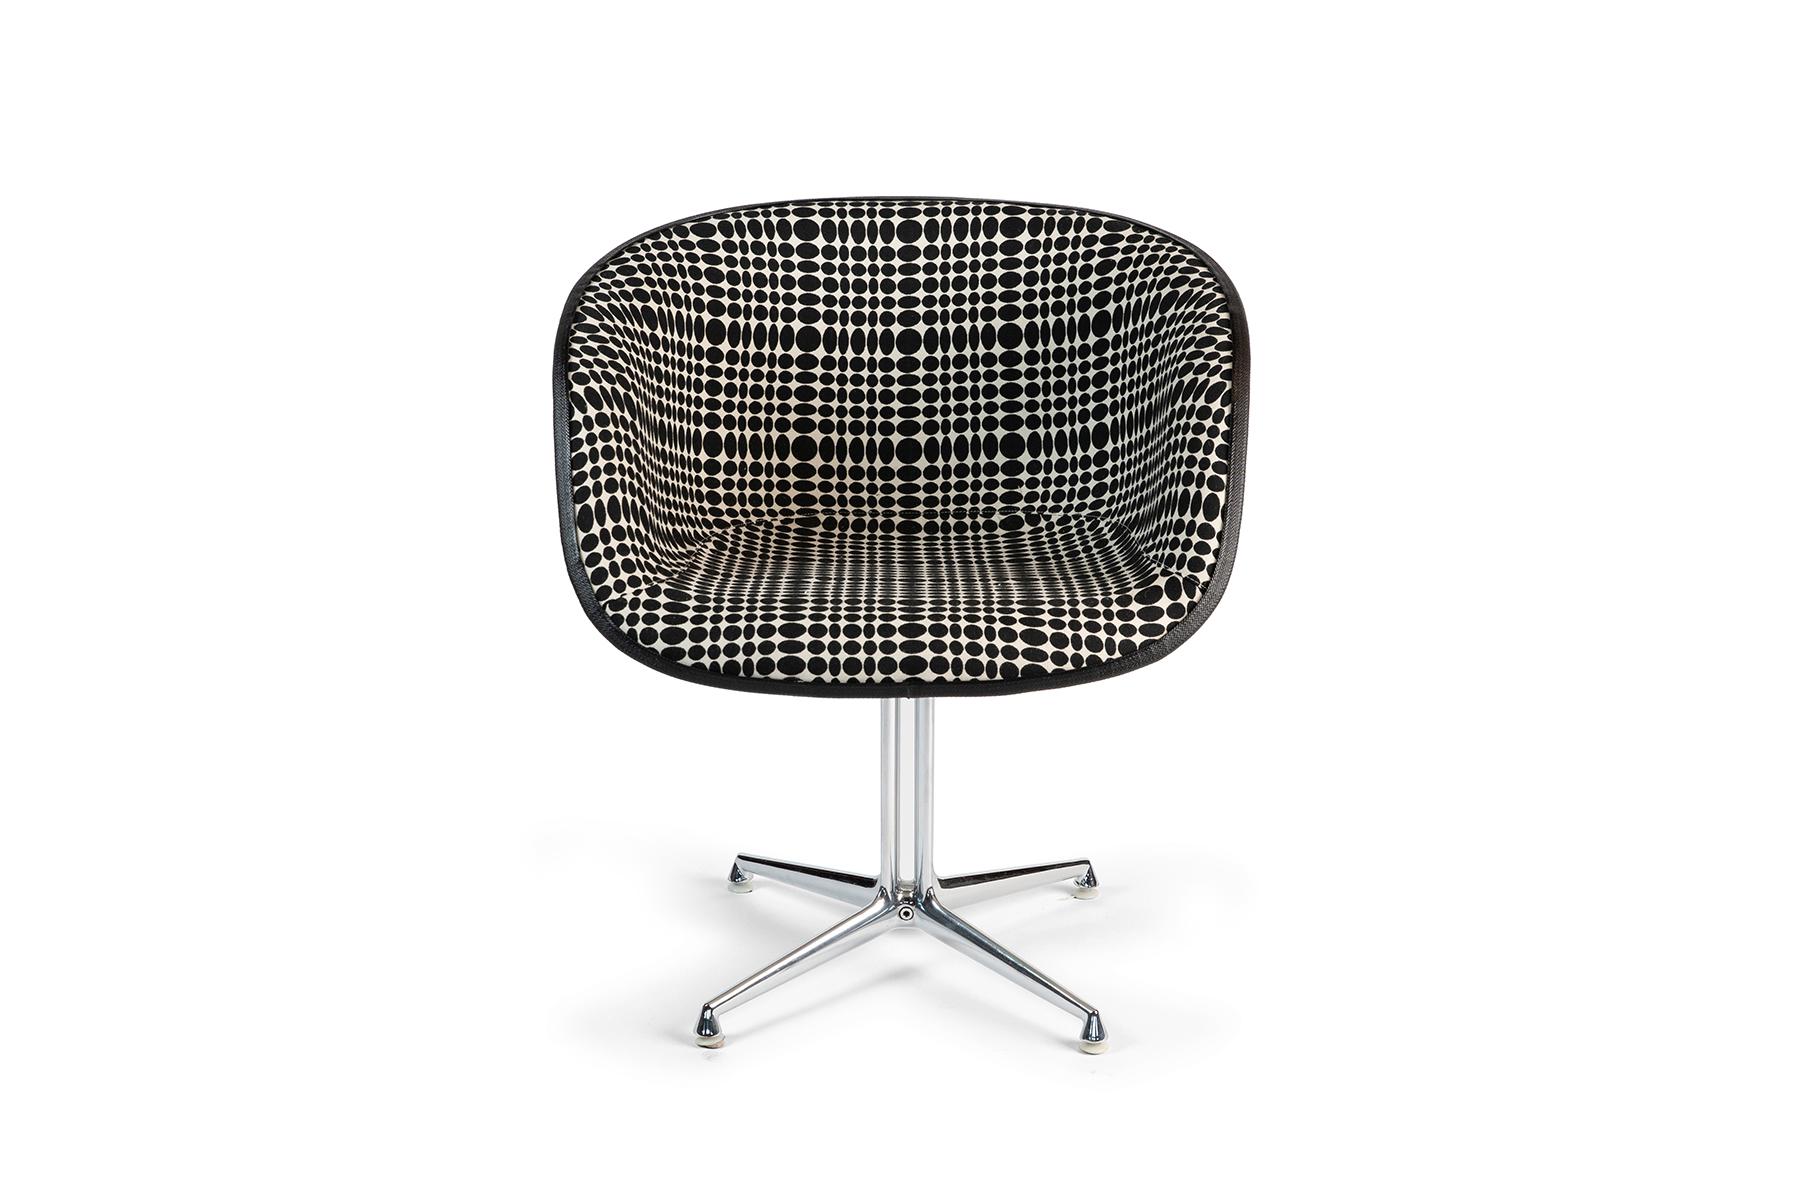 Pair of La Fonda chairs by Charles & Ray Eames for Herman Miller, circa late 1960s. These seldom seen examples have polished steel La Fonda bases and have been upholstered in a Op Art black & white dot Verner Panton for MAHARAM patterned fabric.